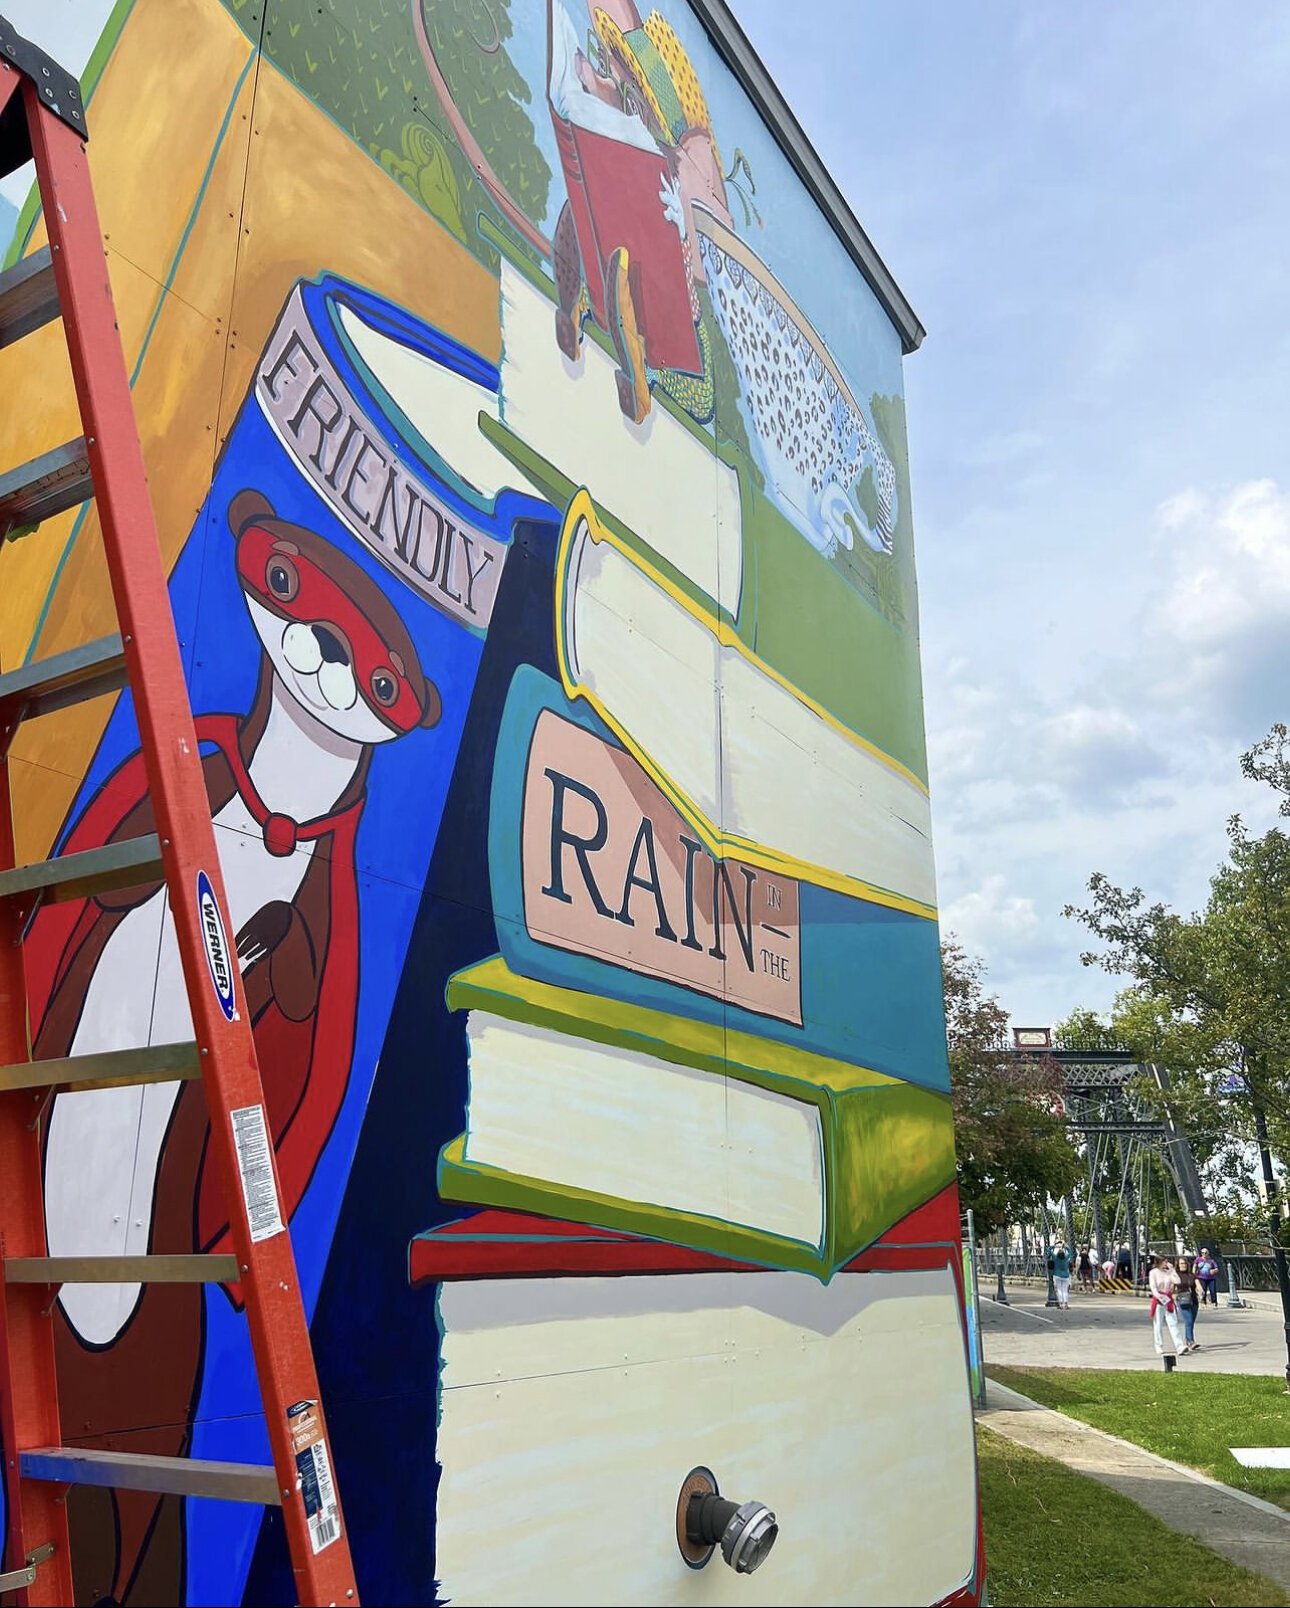 A new “Only Rain in the Drain” mural from Alexandra Hall is currently in progress at TJ Nowak Supply.